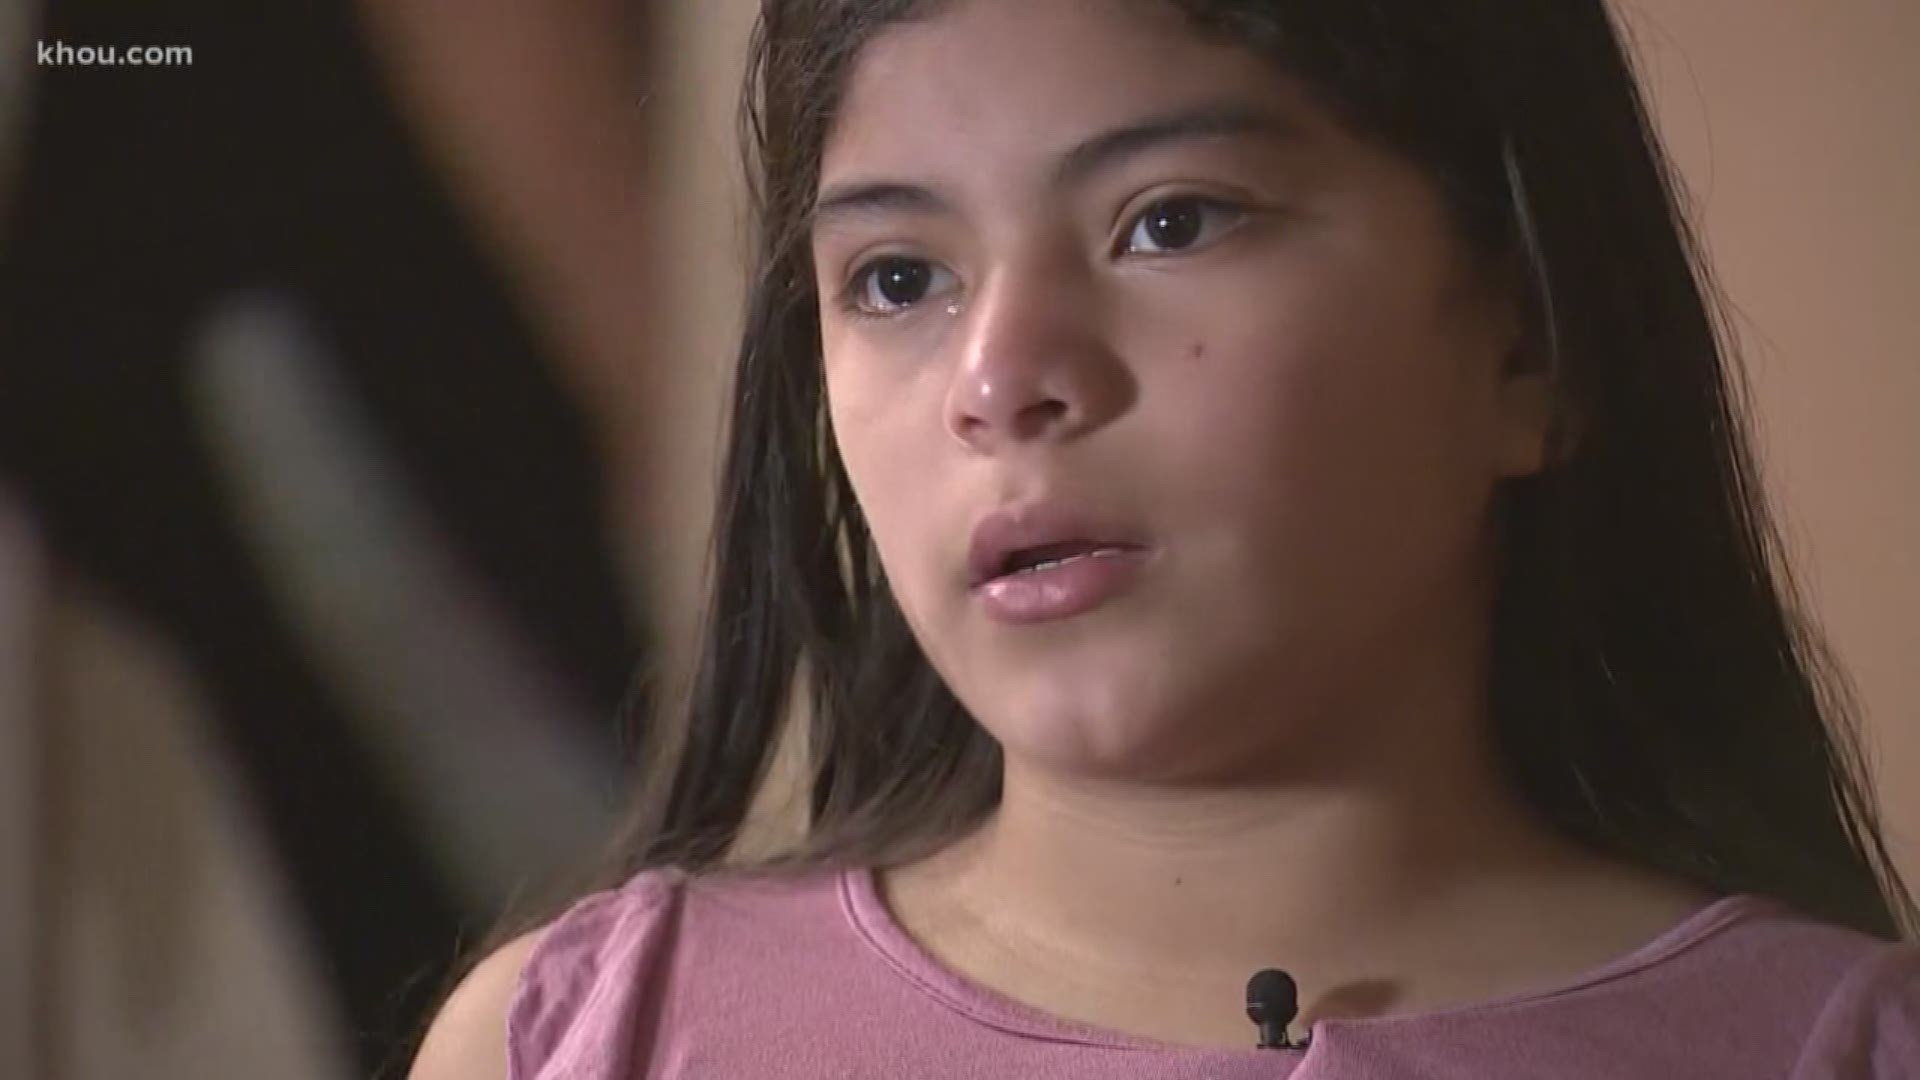 Two years after Betzabe Gomez's letter to Santa went viral, she's still hoping for a Christmas miracle.